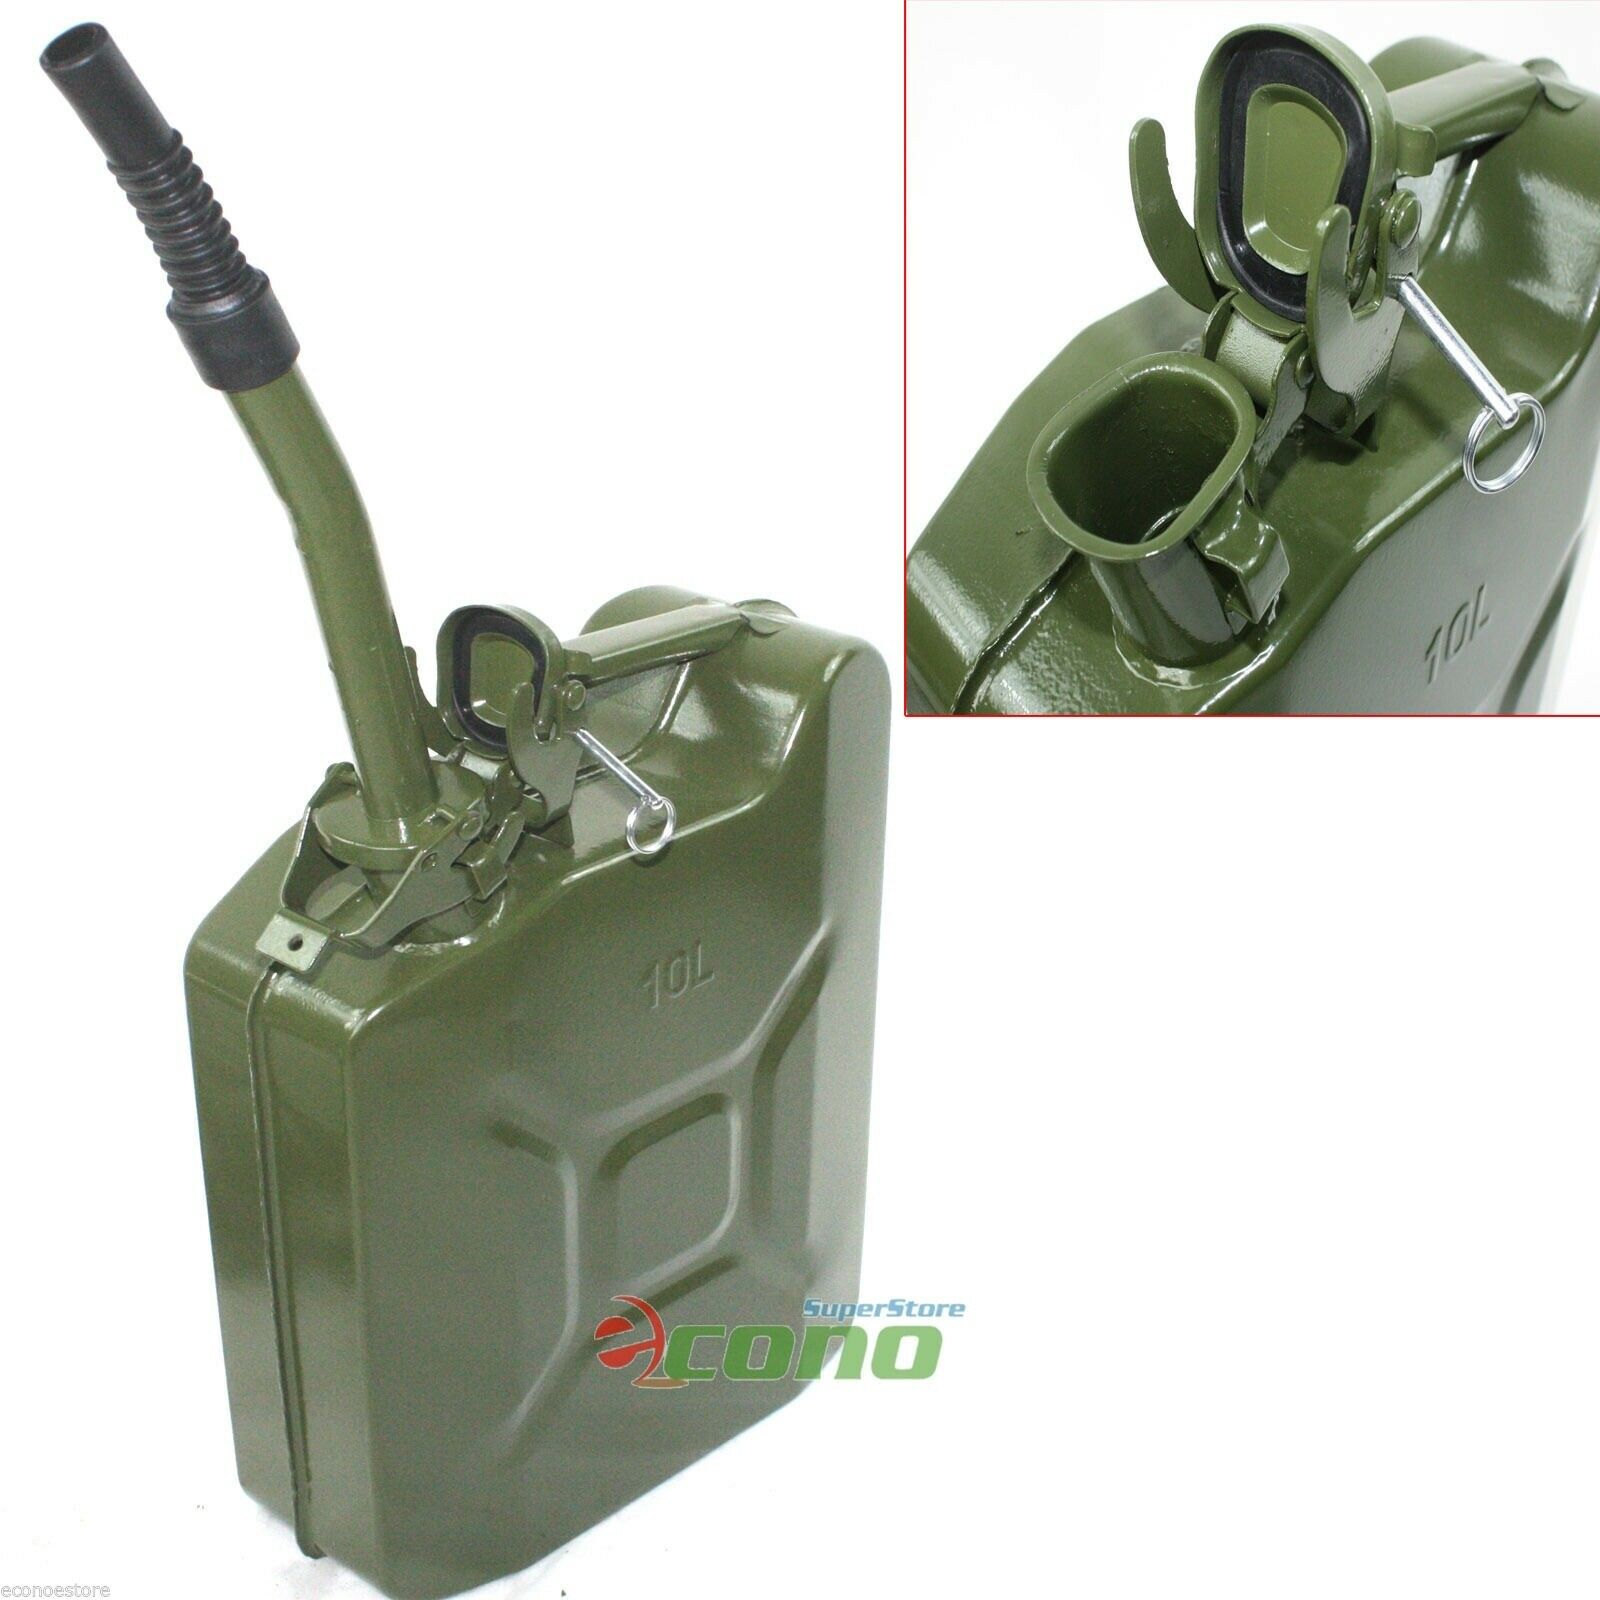 JERRY MILITARY METAL CAN FUEL OIL WATER DIESEL STORAGE TANK WITH SPOUT Kuyal STEEL PETROL CAN 10L 